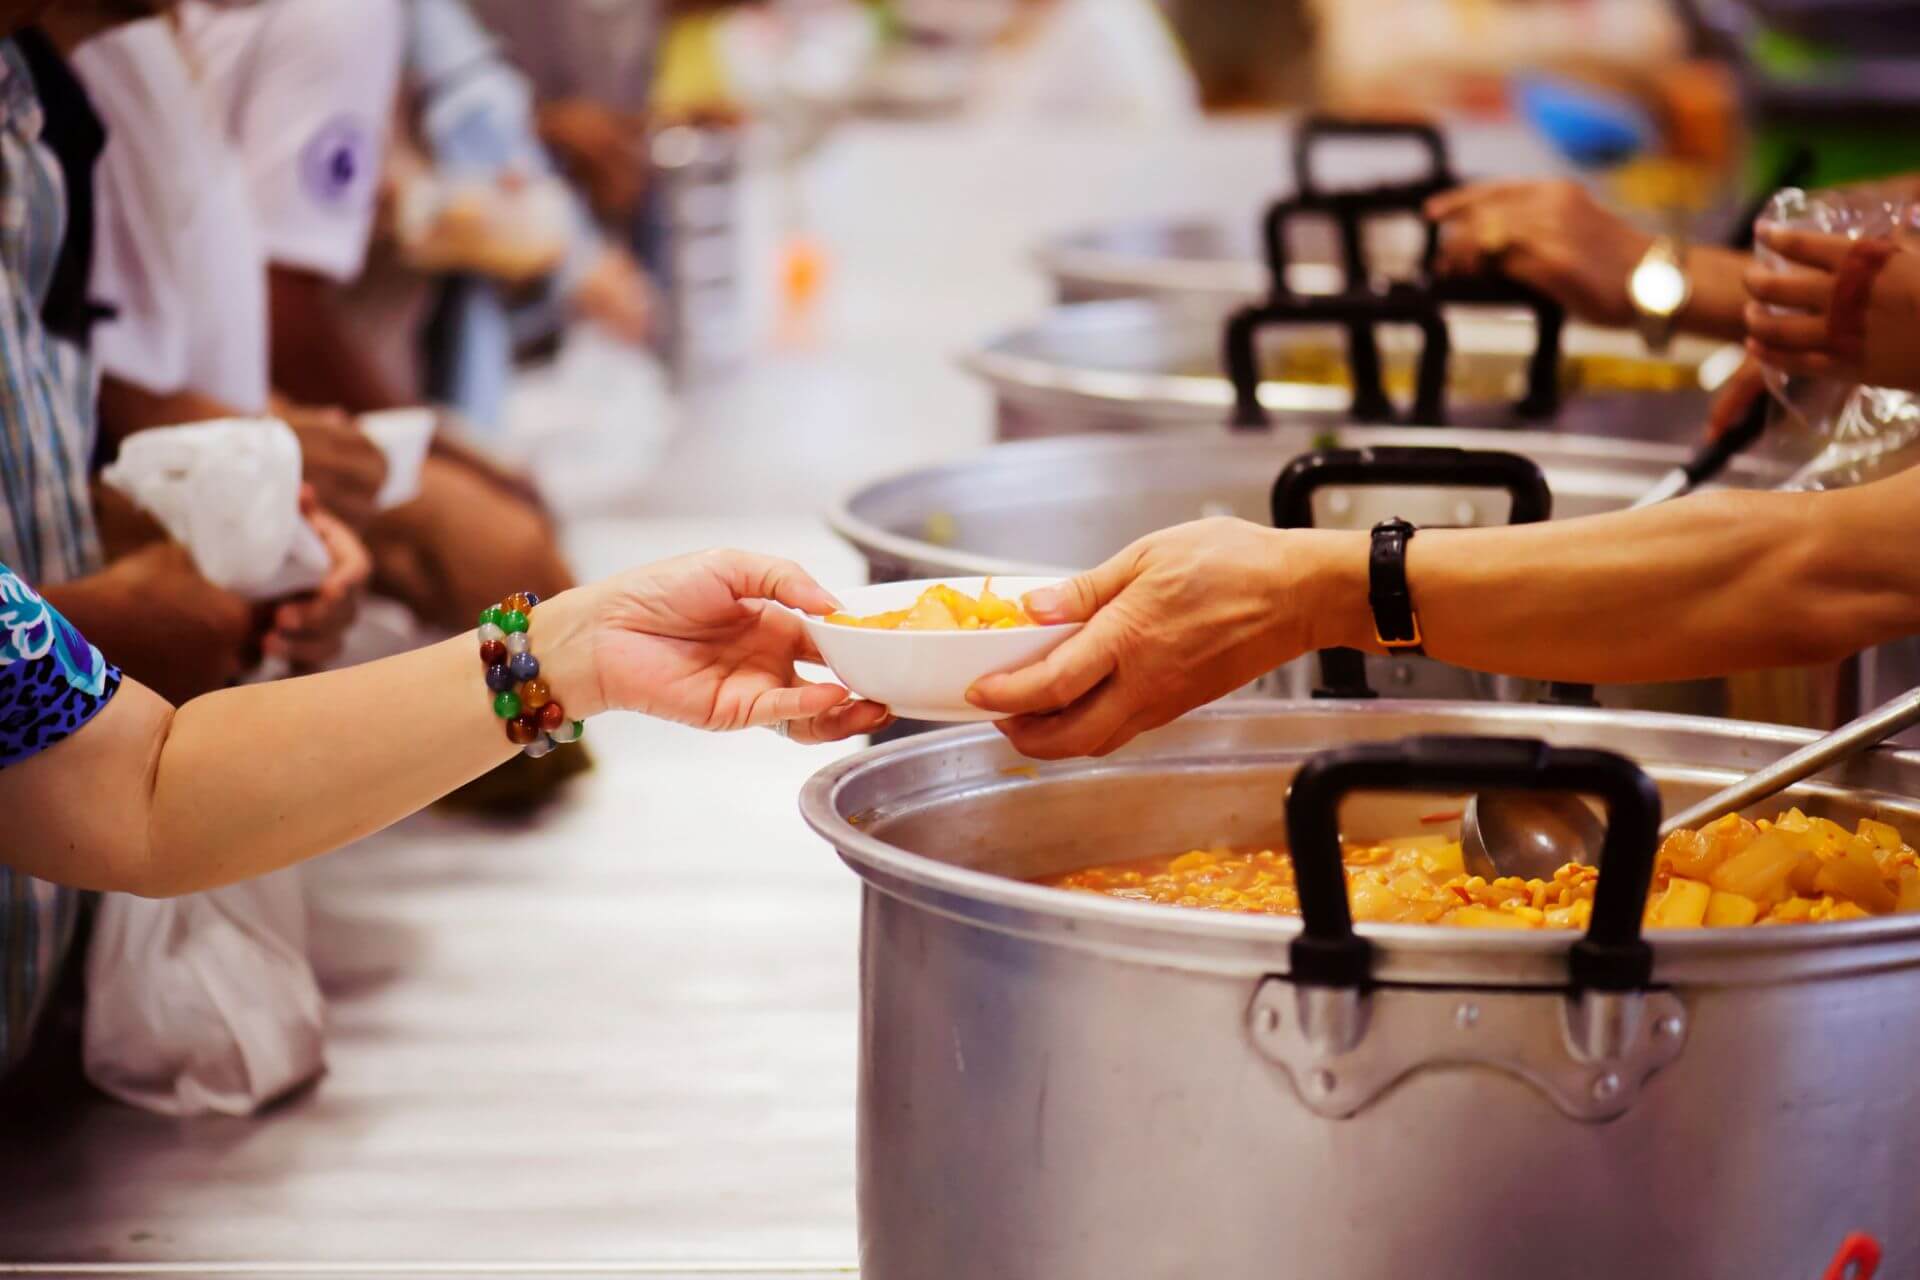 Volunteers in NYC serving food at a soup kitchen